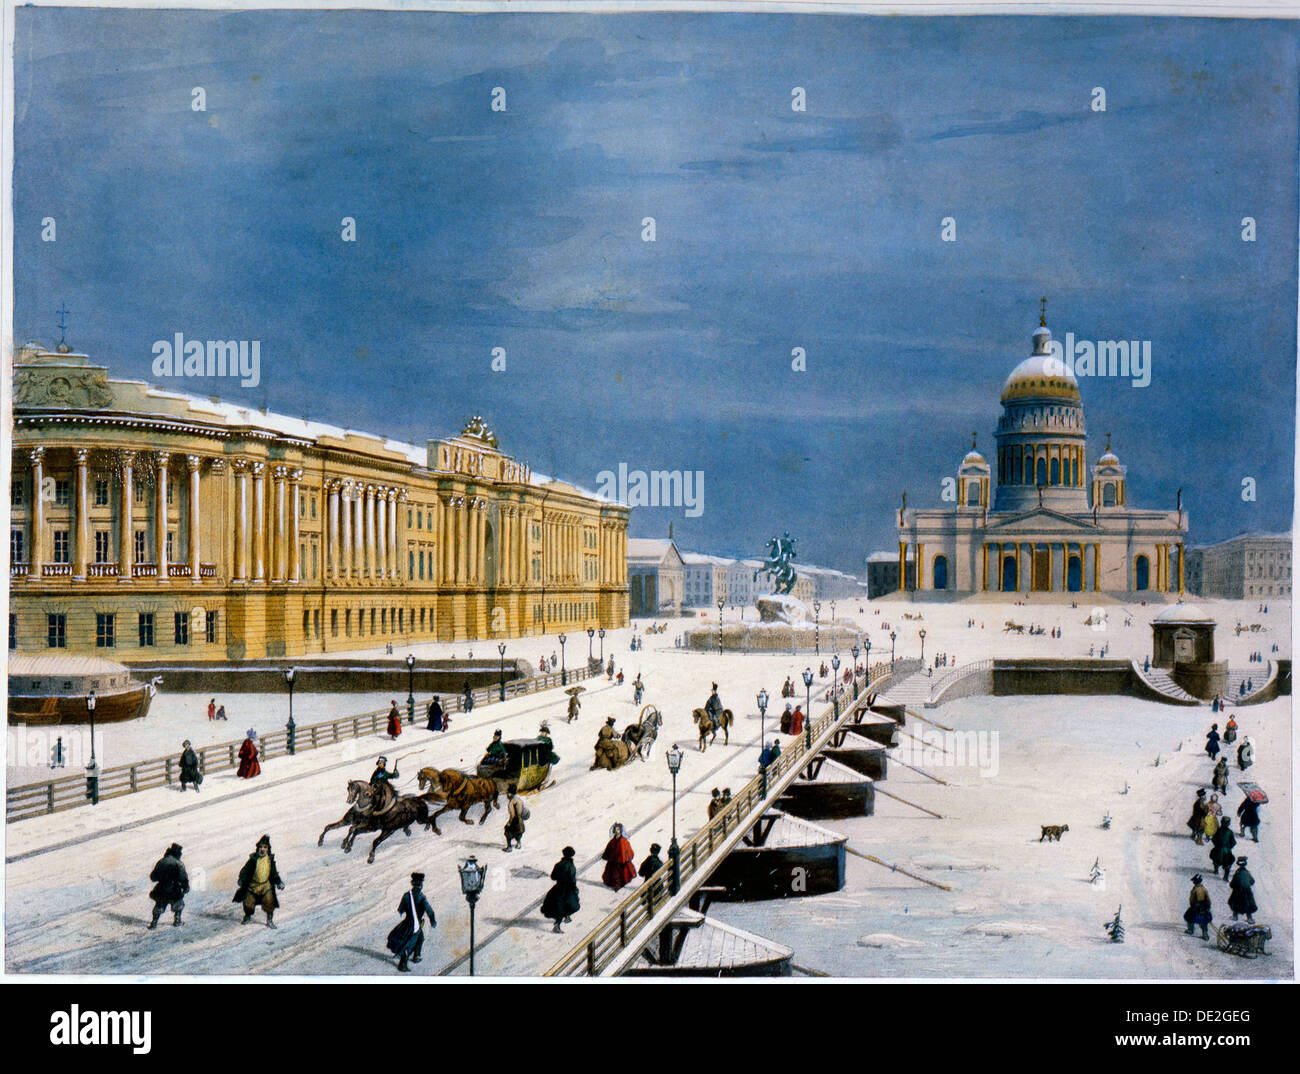 St Isaac's Cathedral and Senate Square, St Petersburg, Russia, 1840s. Artist: Louis-Pierre-Alphonse Bichebois Stock Photo